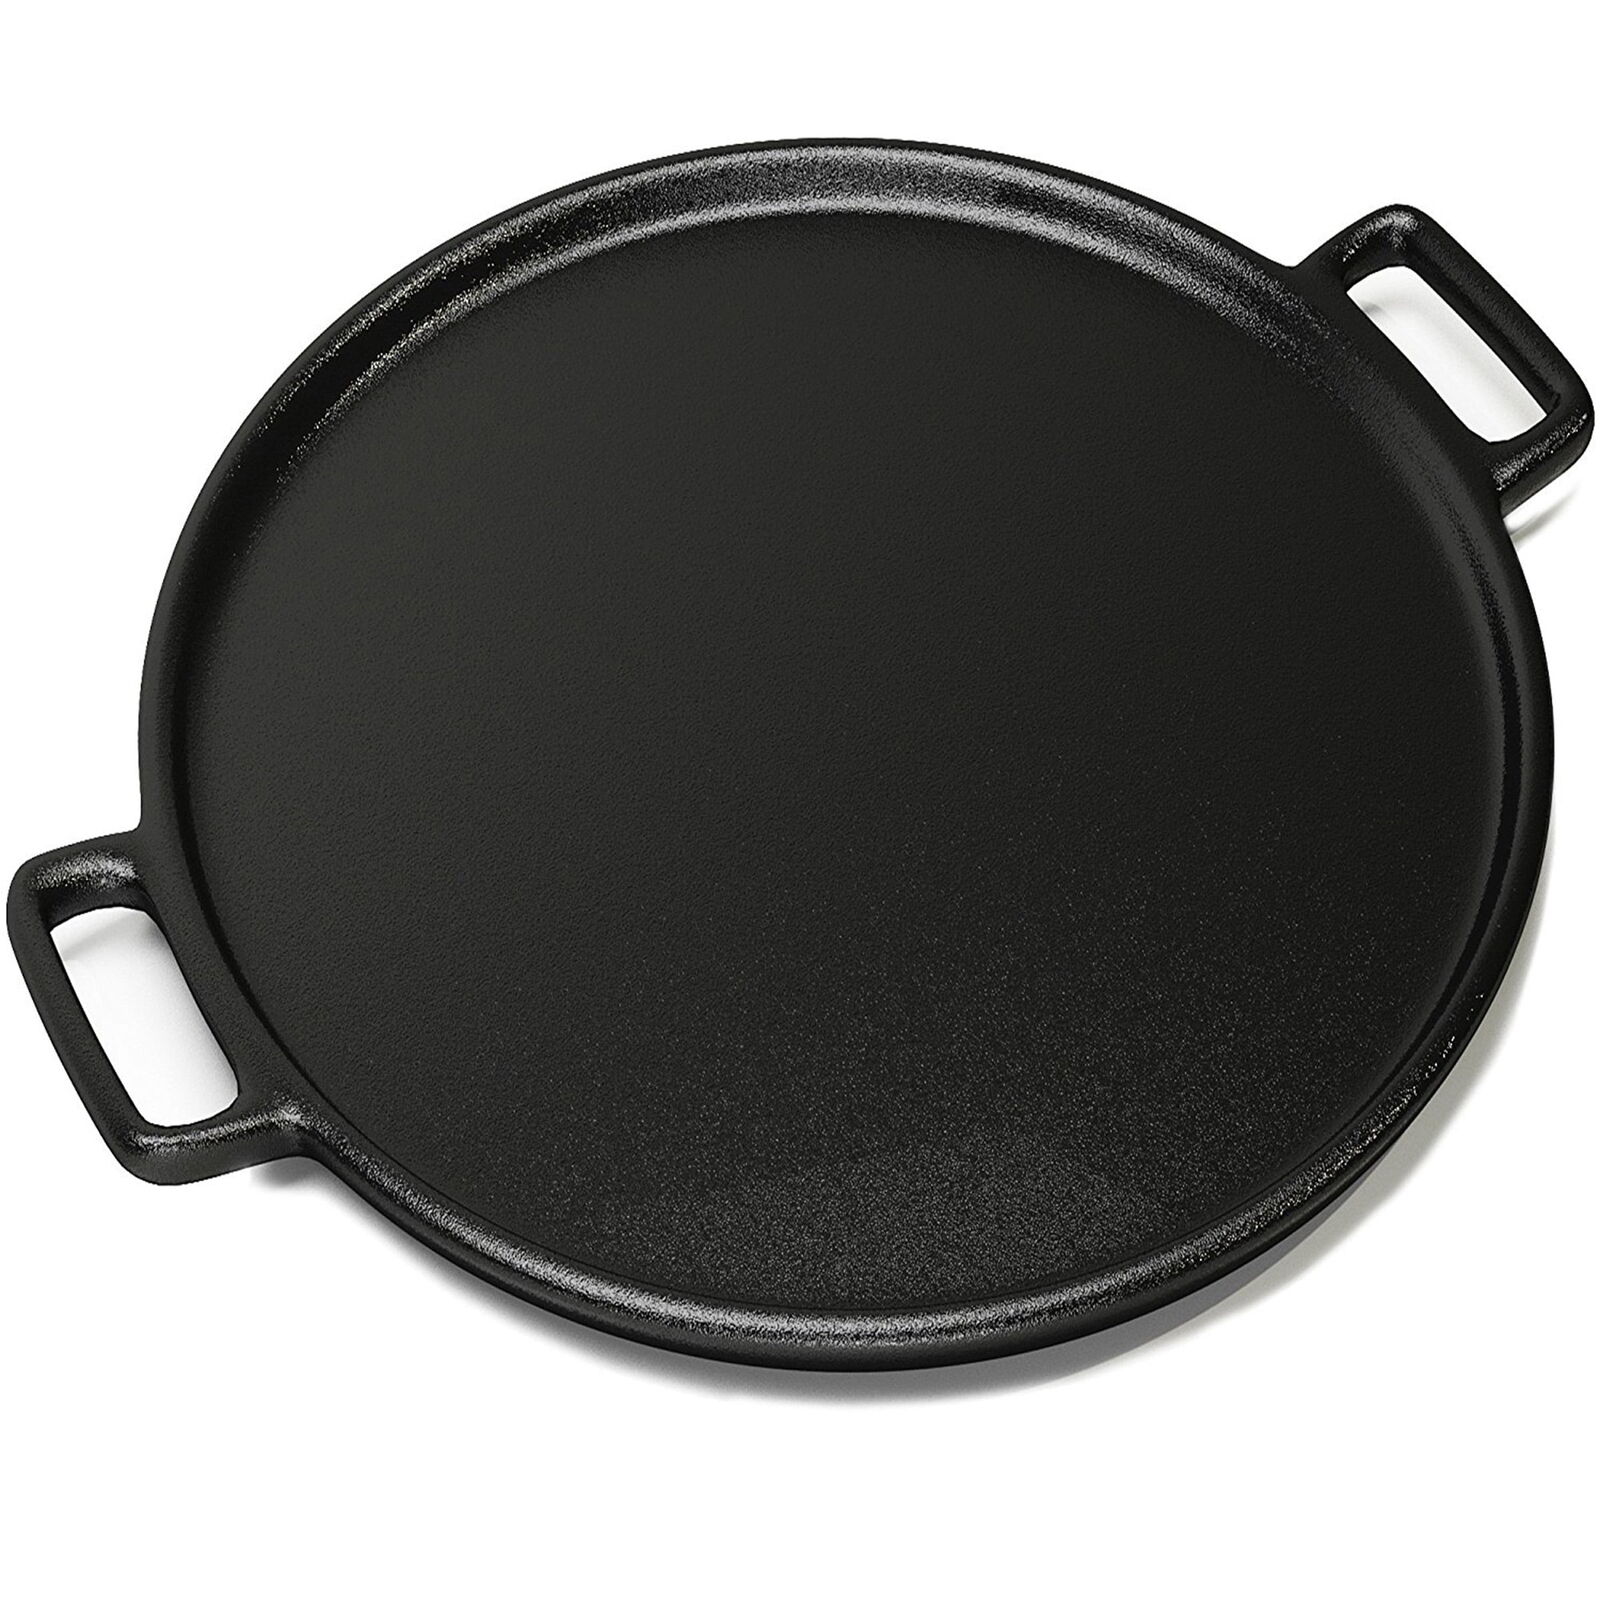 14'' Black Pizza Pan Cast Iron Skillet Kitchen Cookware Frying Baking Cooking